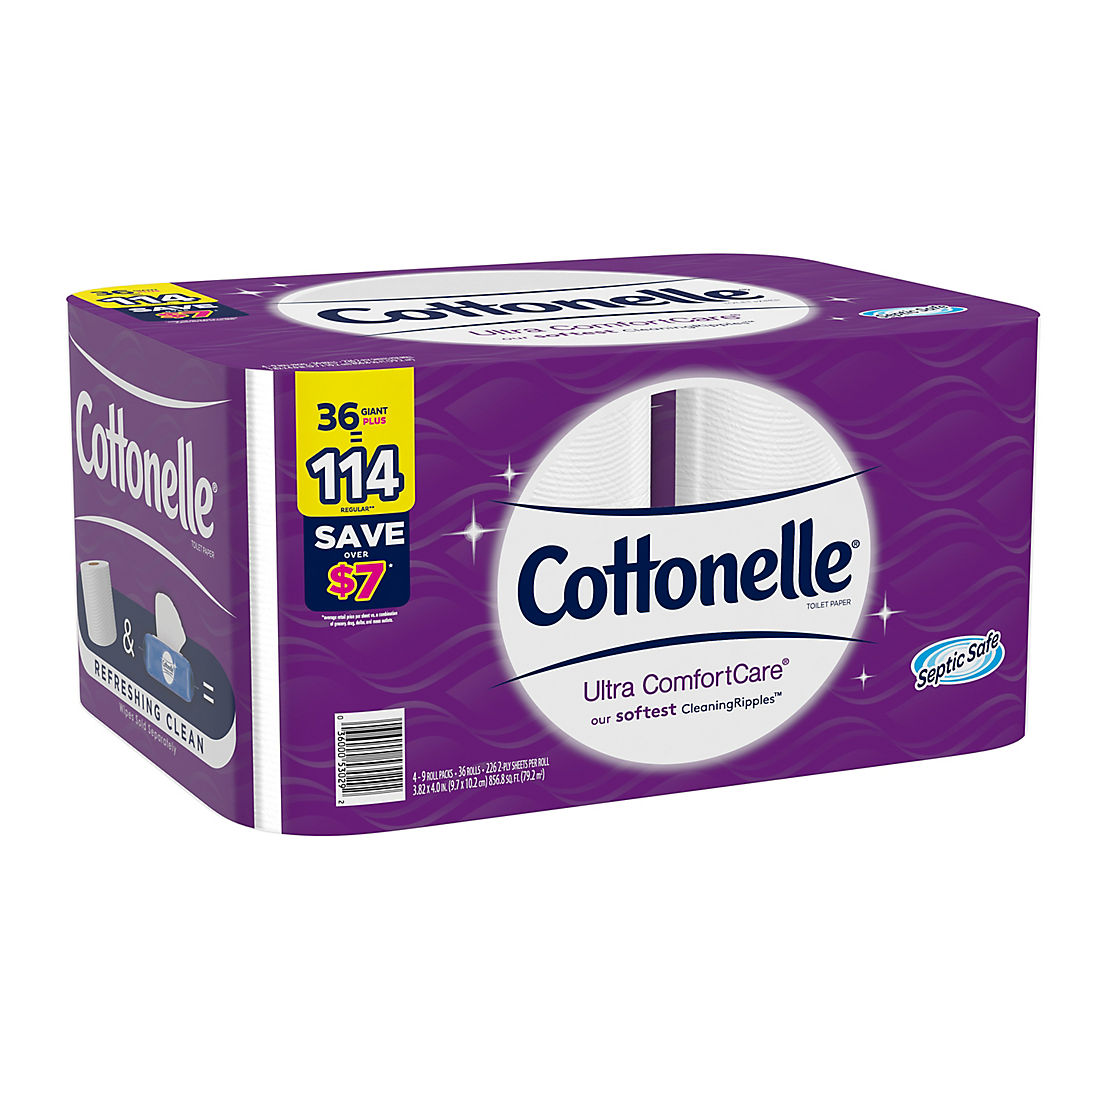 Cottonelle Ultra Comfortcare Giant Roll 2 Ply 200 Sheet Bath